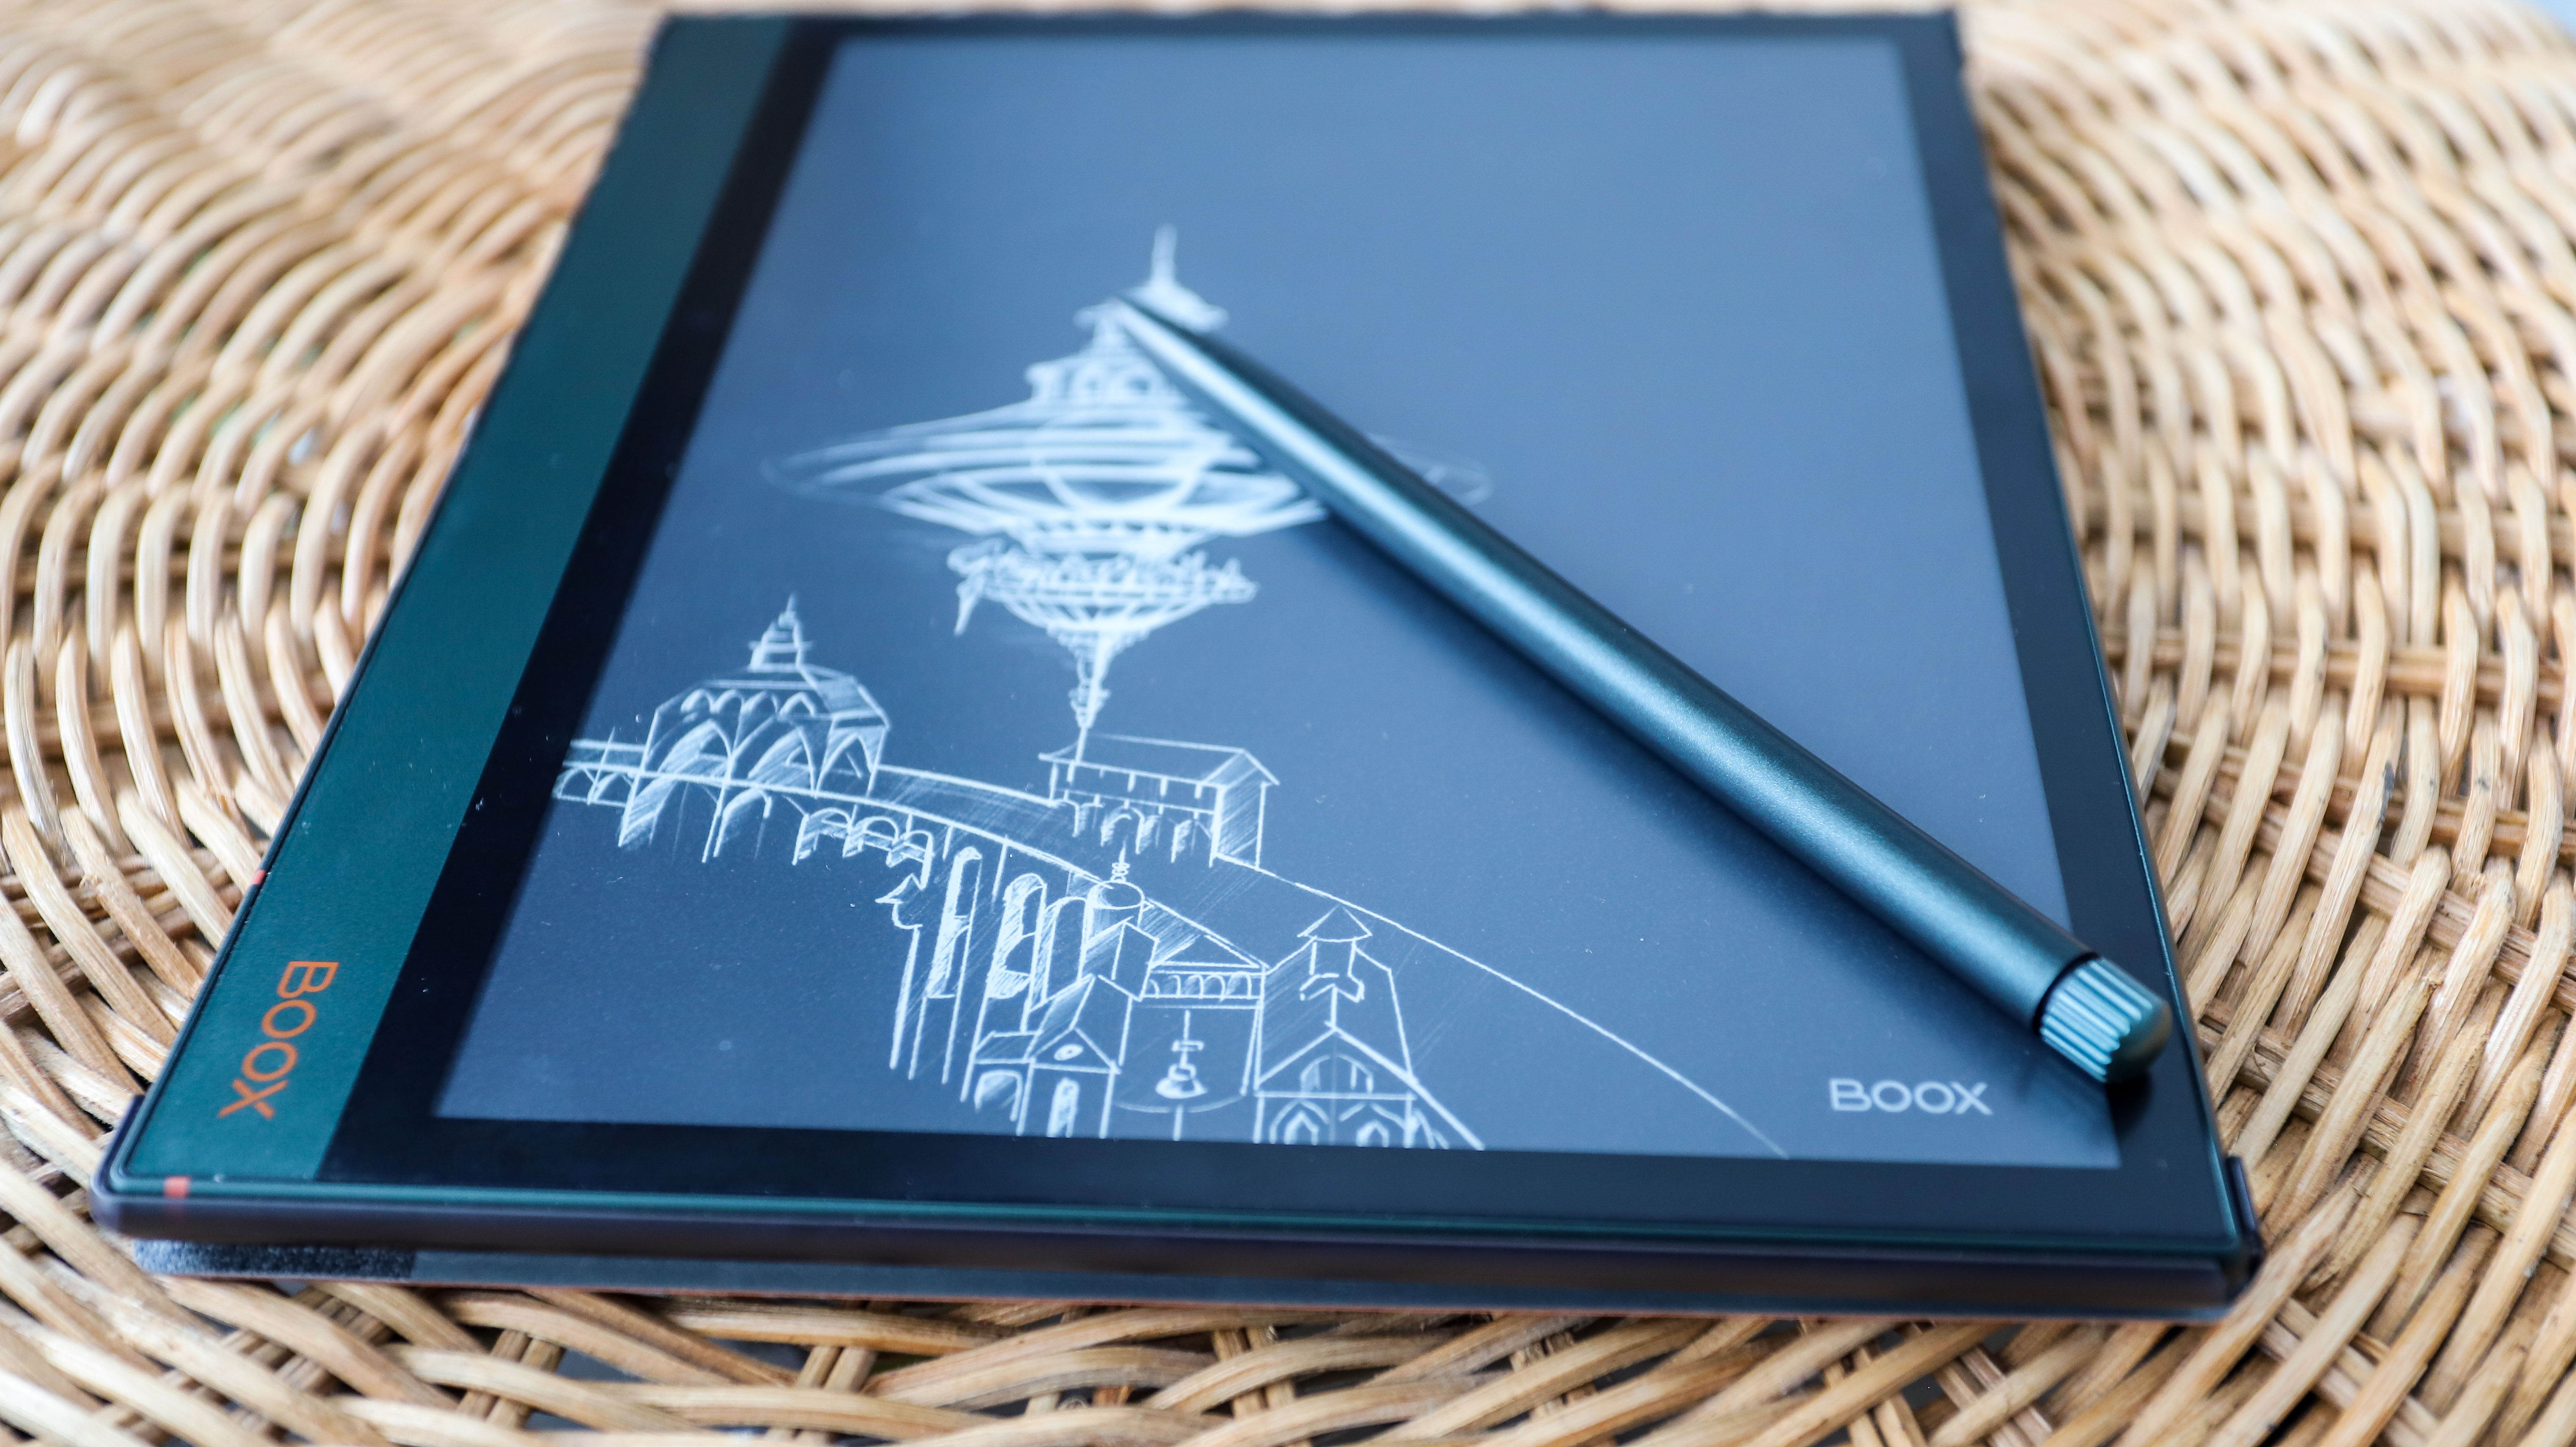 The Onyx Boox Note Air 2 is hands down my favorite E Ink tablet